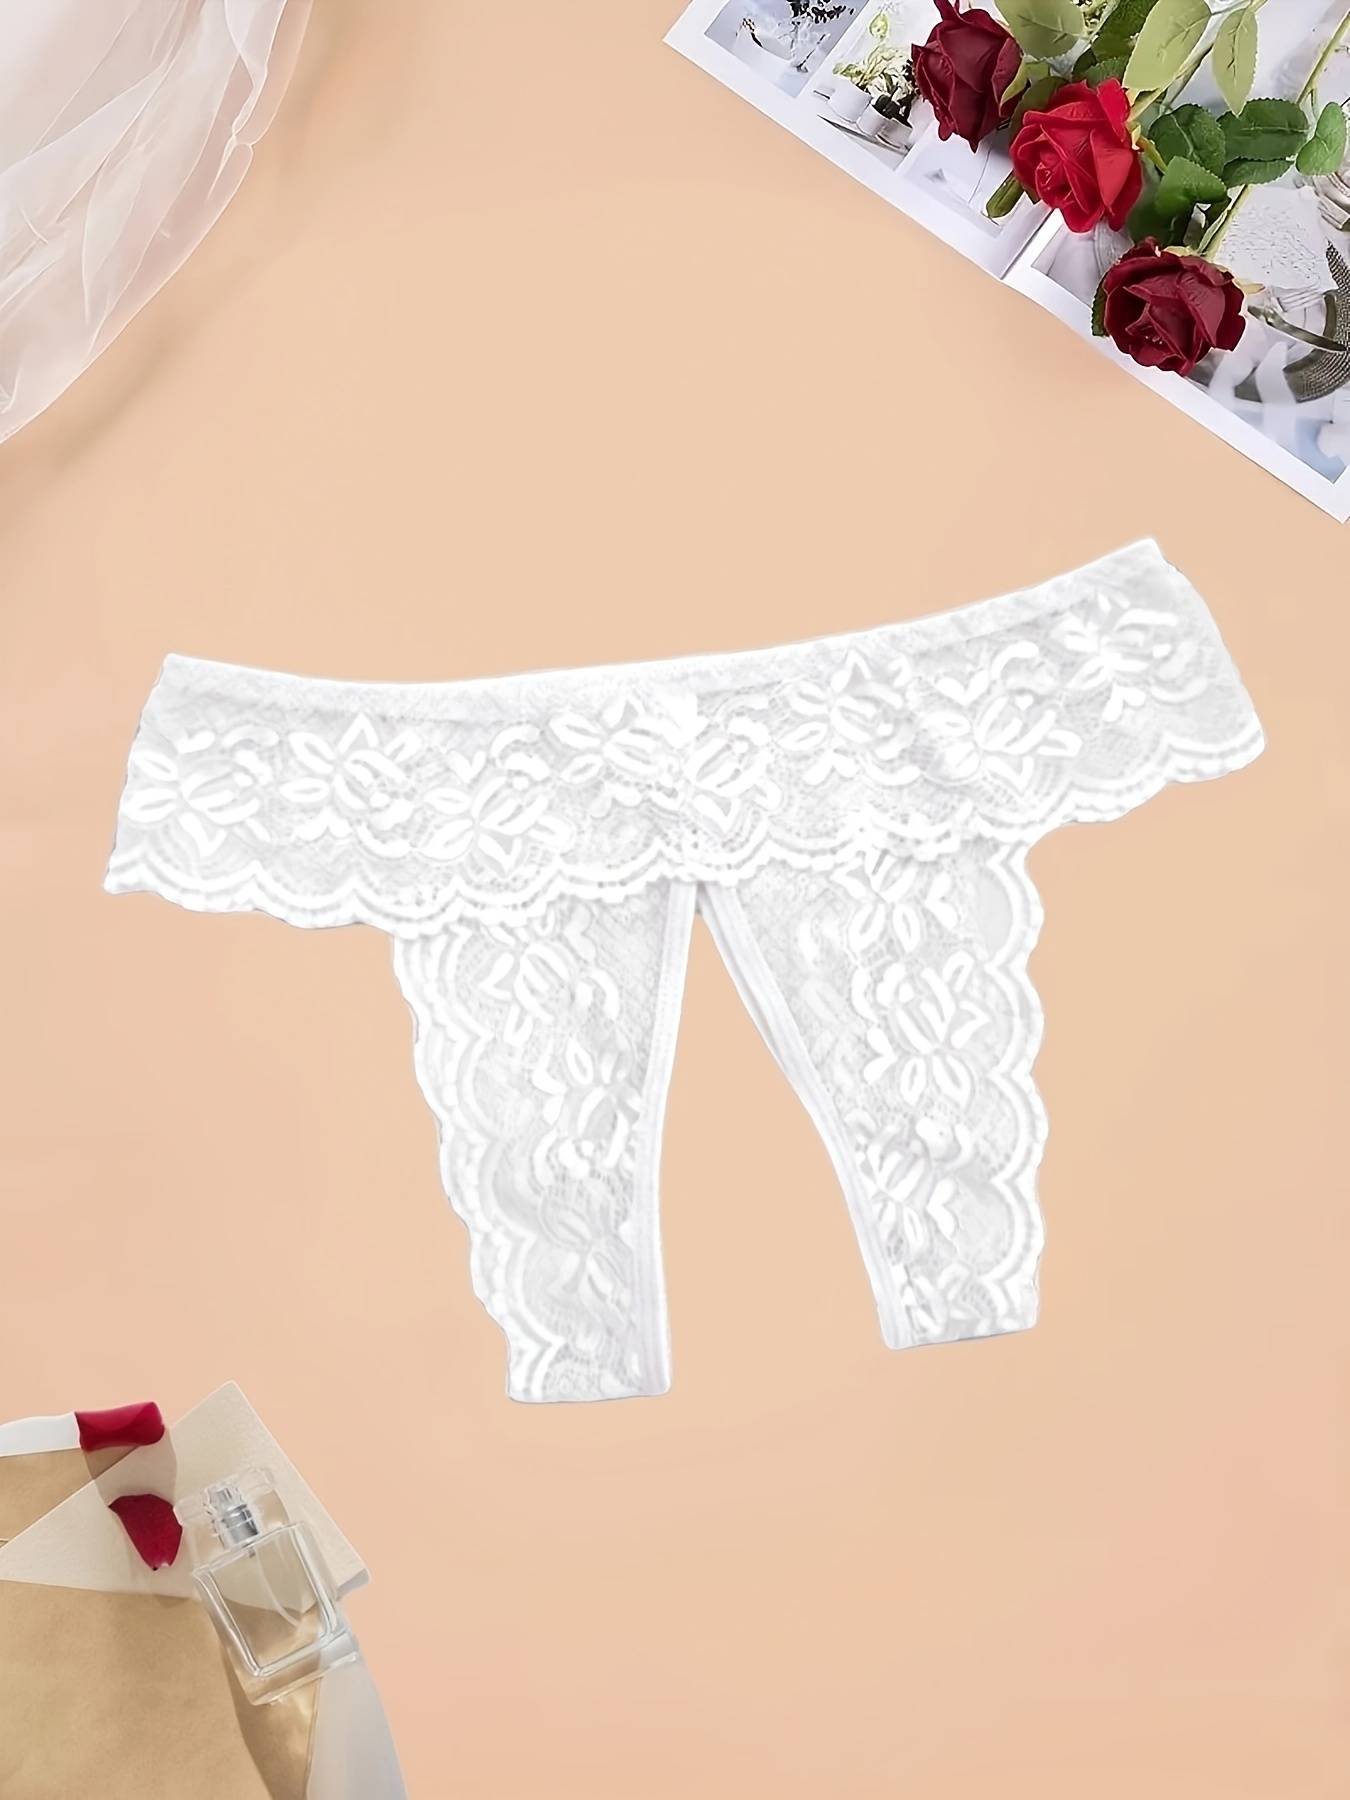 Women's Sexy Crotchless Panties Lace Floral Thongs Lingerie G-string  Underwear